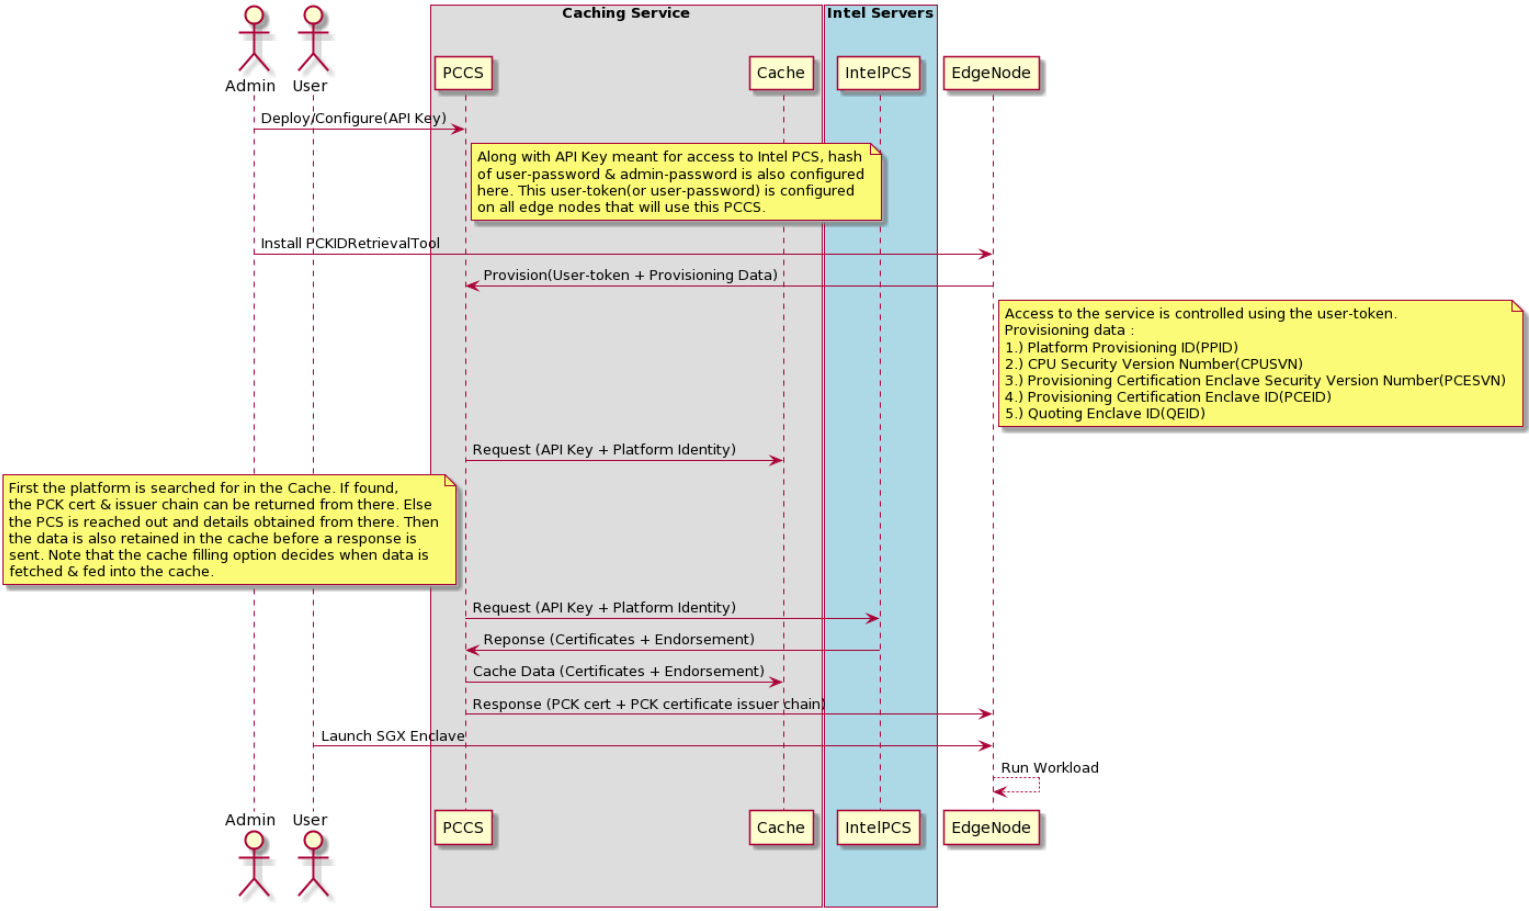 SGX provisioning sequence diagram